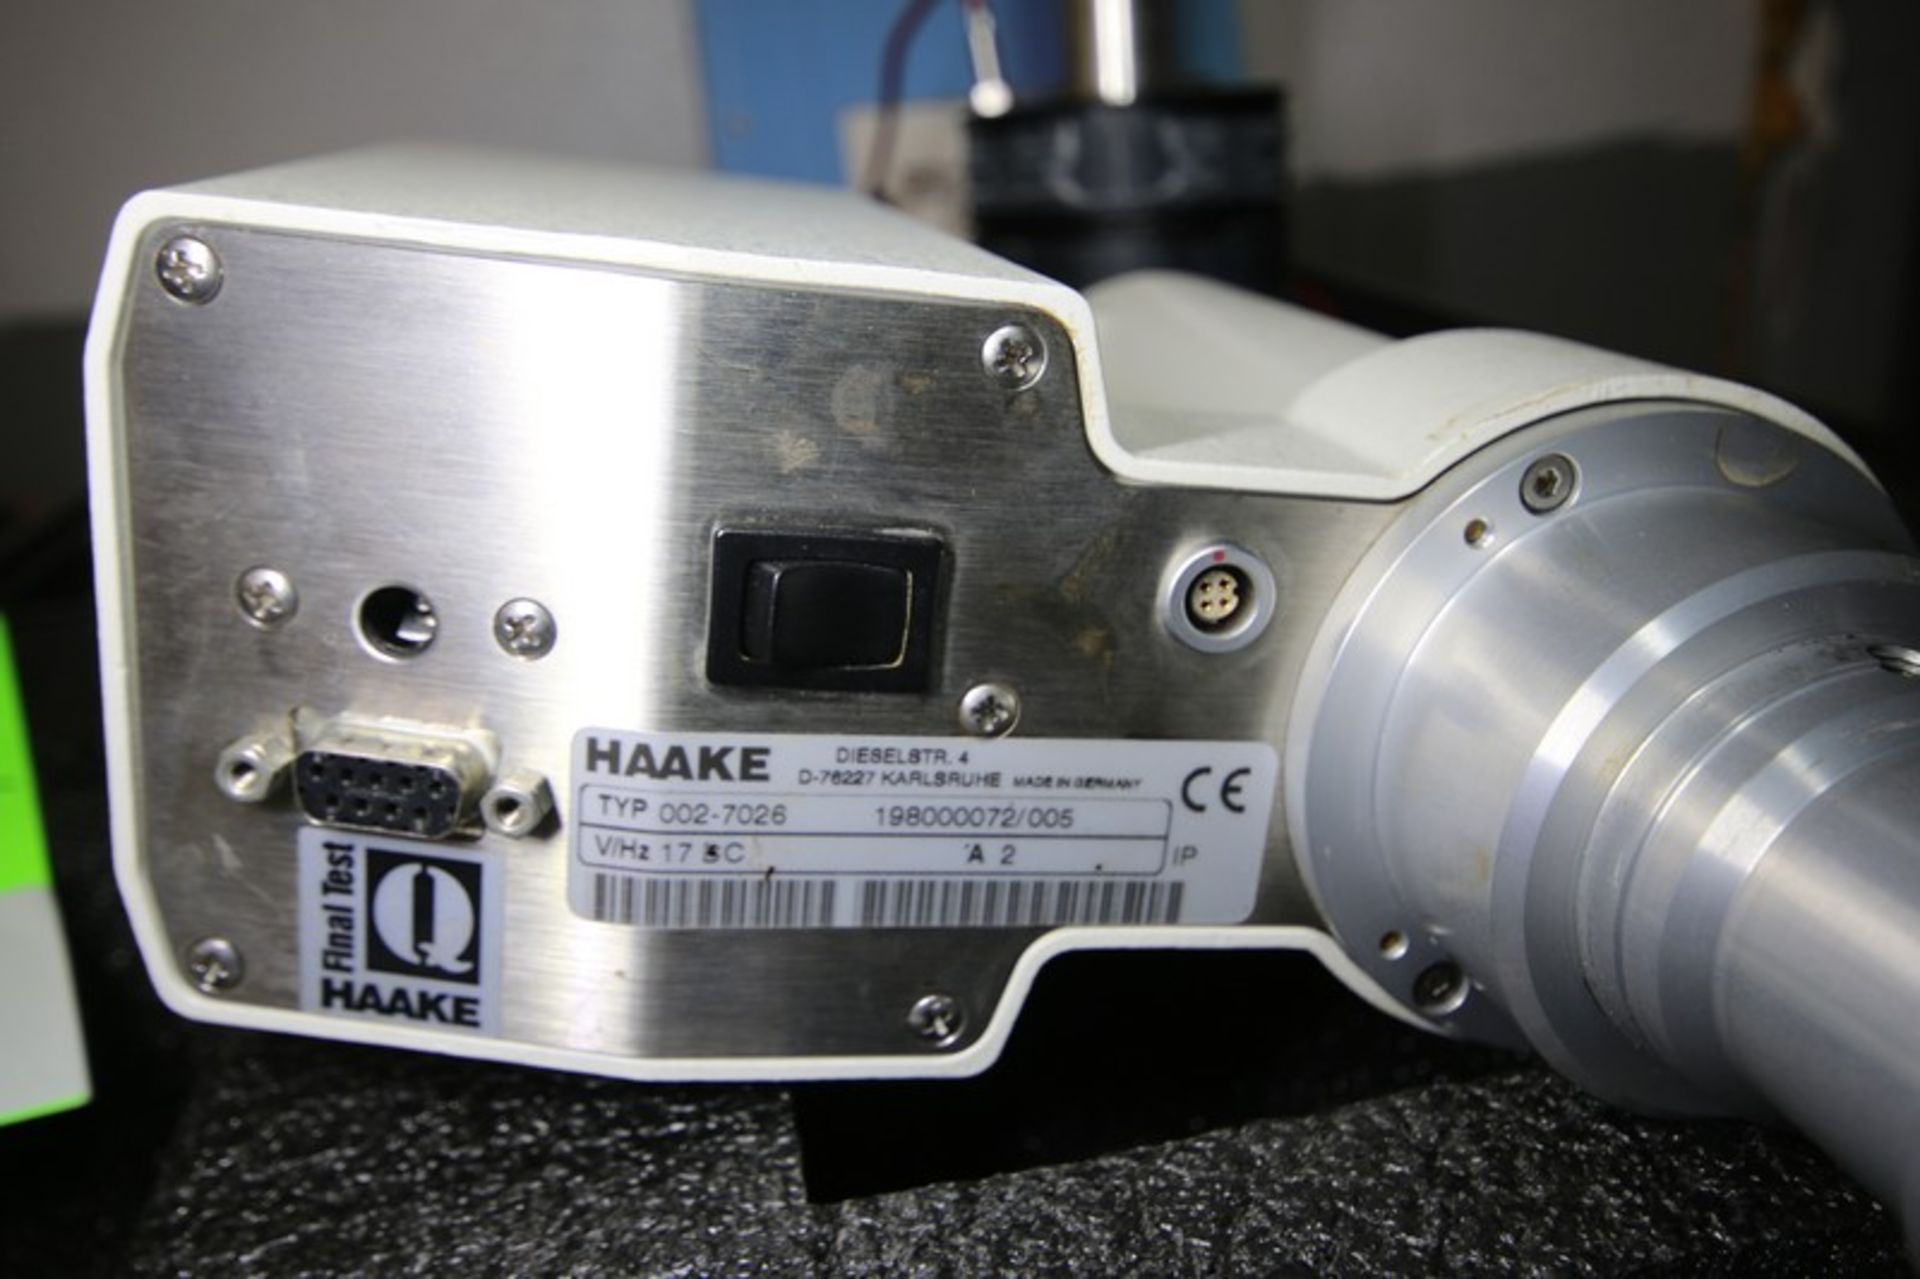 Haake VT550 Viscometer, Type 002-7026, SN 198000072/005 with Case, Heat Chamber & Manual (INV#66956) - Image 4 of 5